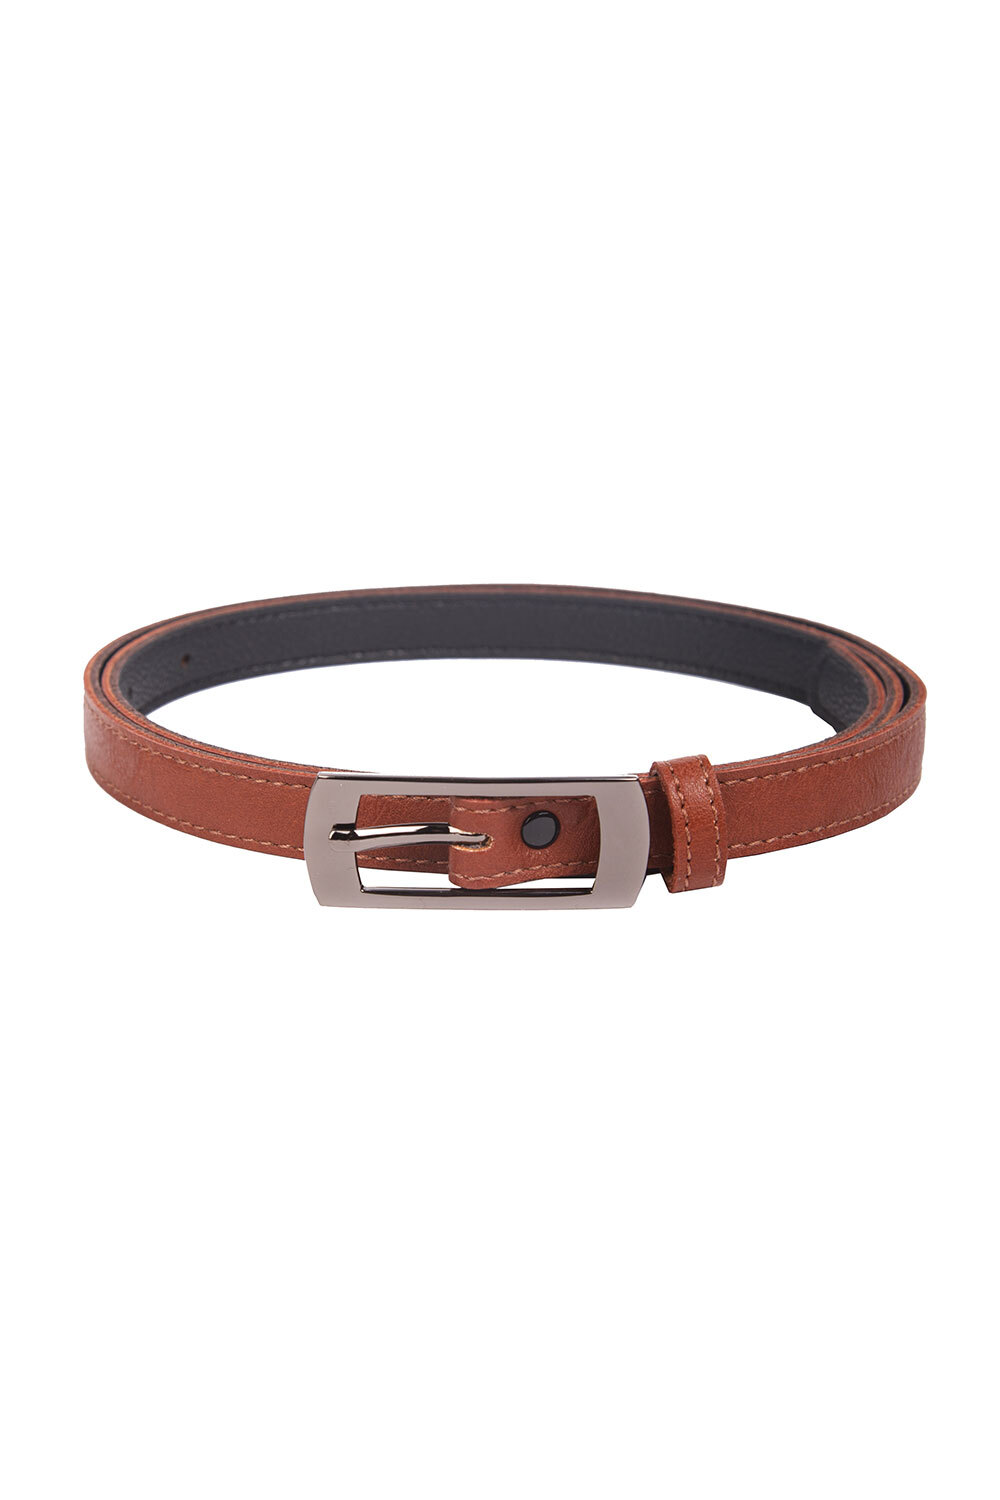 Narrow strap made of eco leather